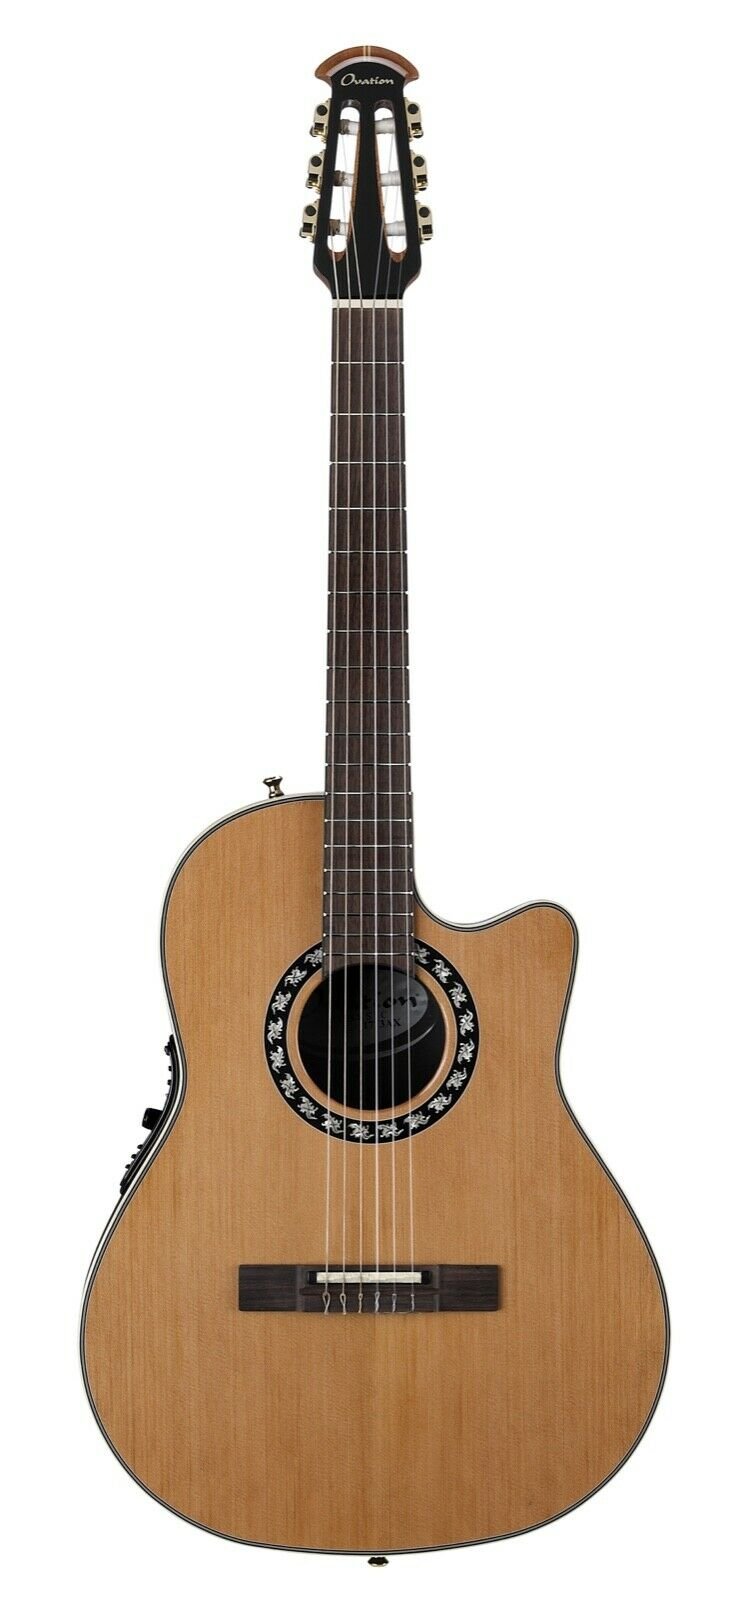 Ovation Timeless Collection Classical Legend Nylon String Guitar - Natural Cedar